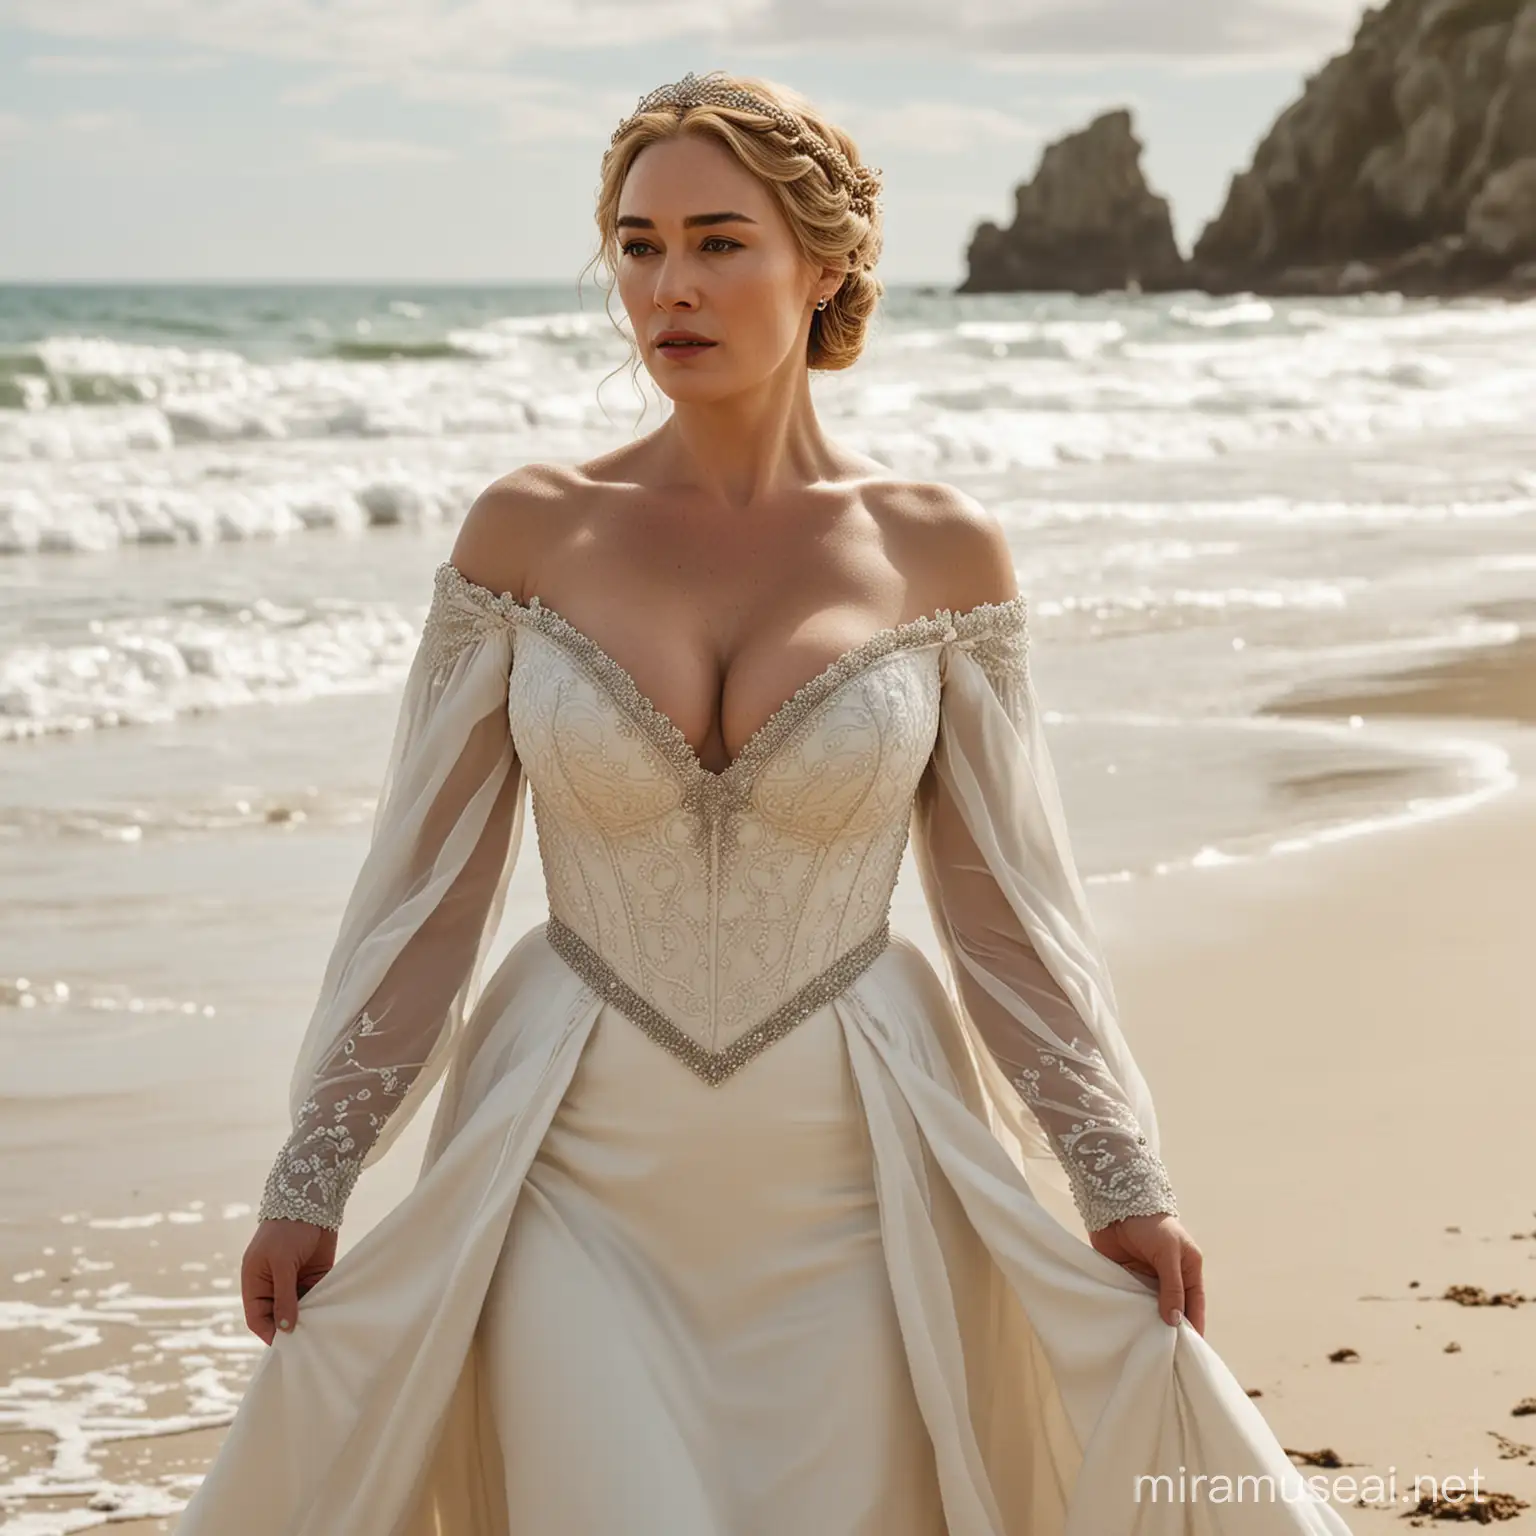 cersei lannister in a white wedding dress on the beach, bbw, giant breast, massive cleavage